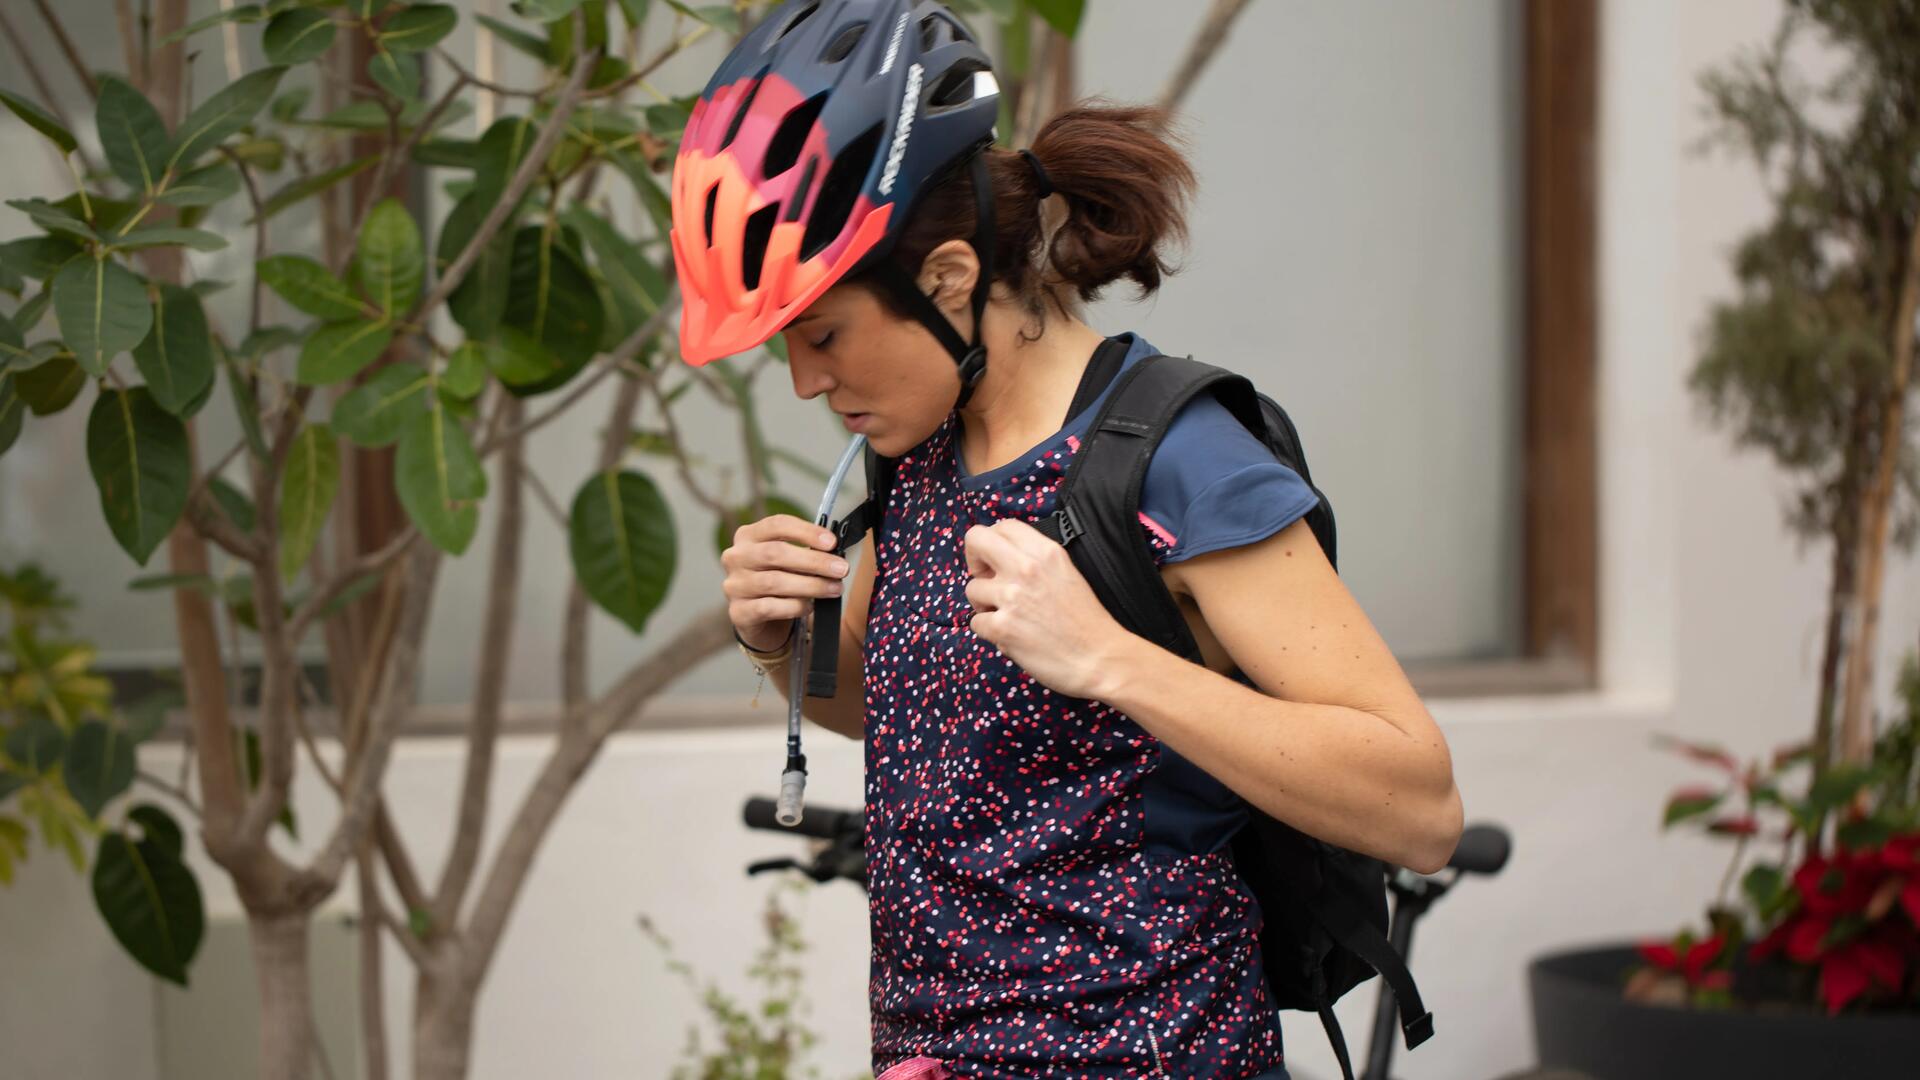 A woman preparing her hydration system before leaving home on her bike